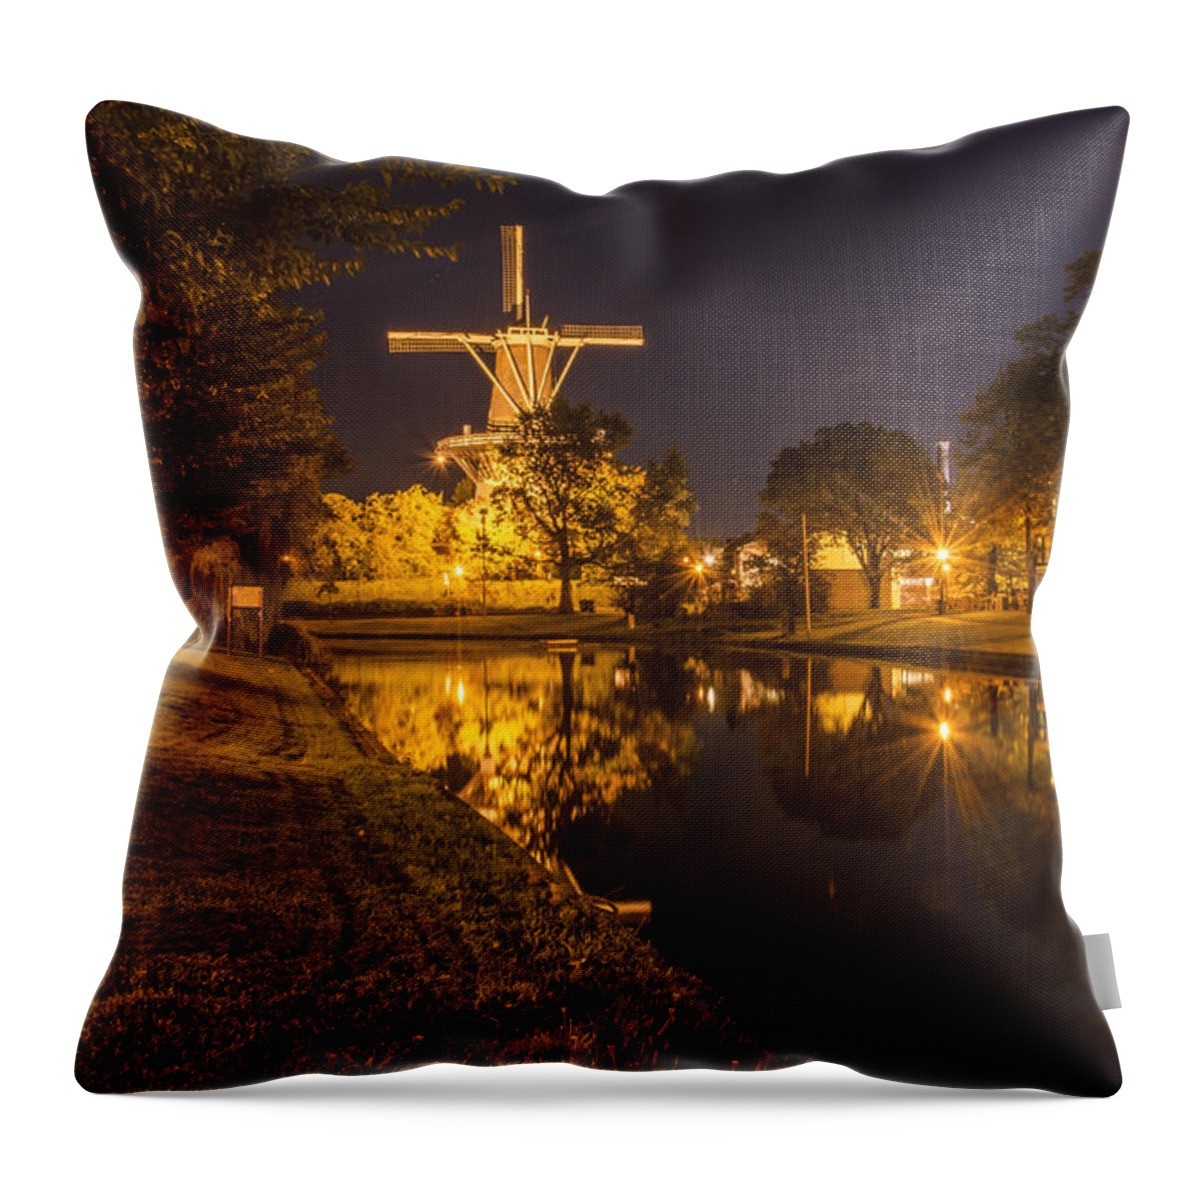 Windmill Throw Pillow featuring the photograph Leiden Windmill By Night by Frans Blok